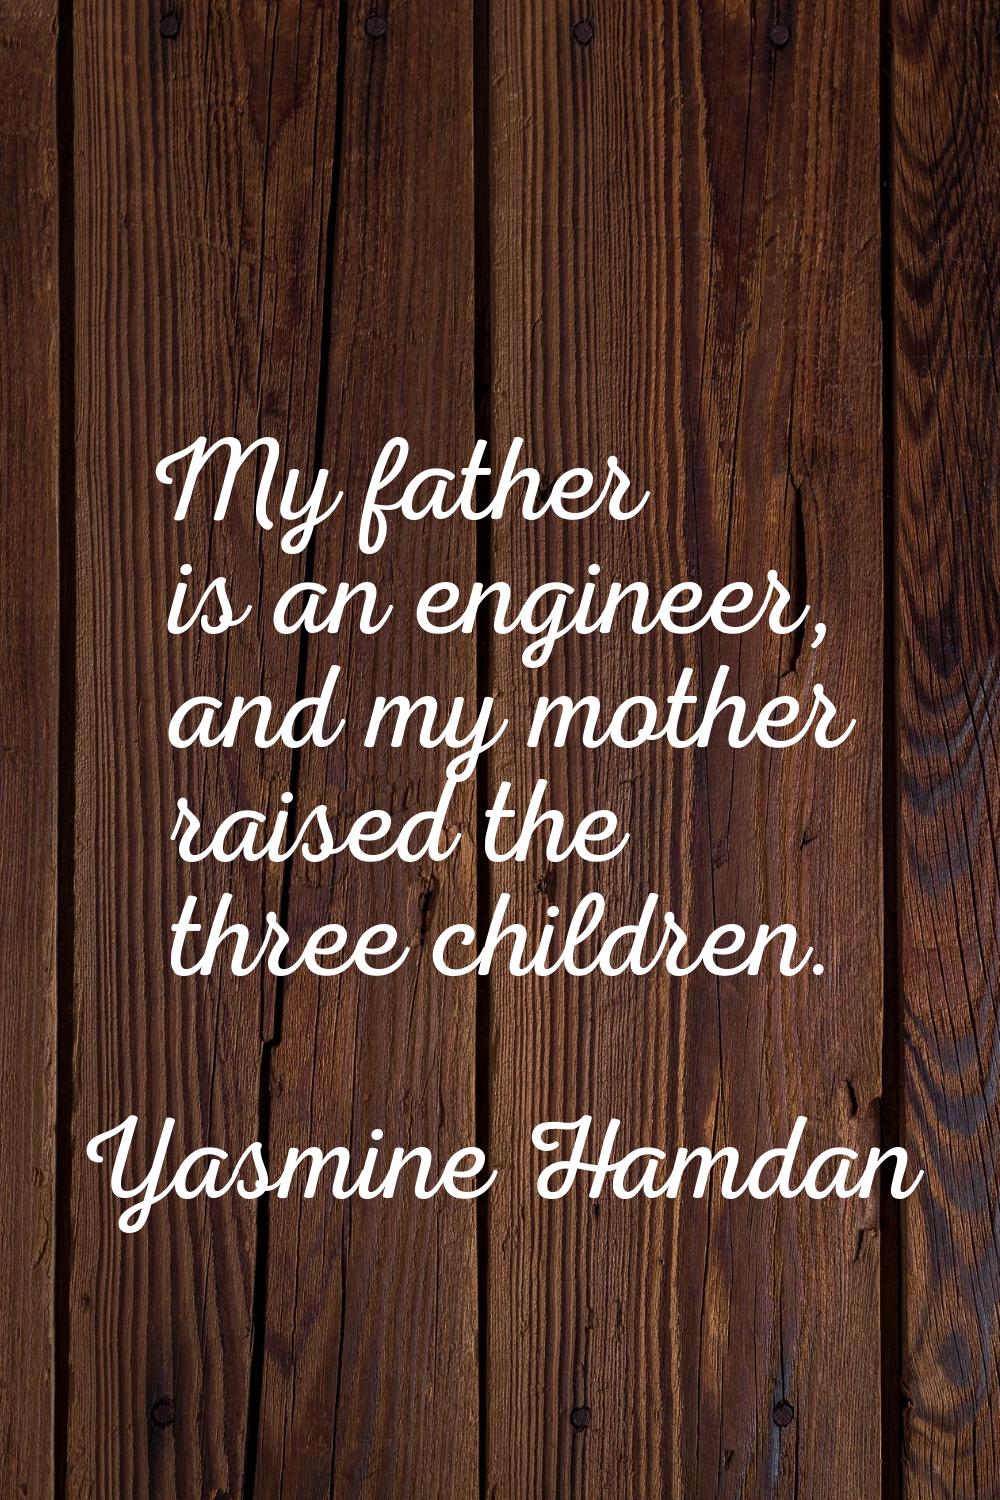 My father is an engineer, and my mother raised the three children.